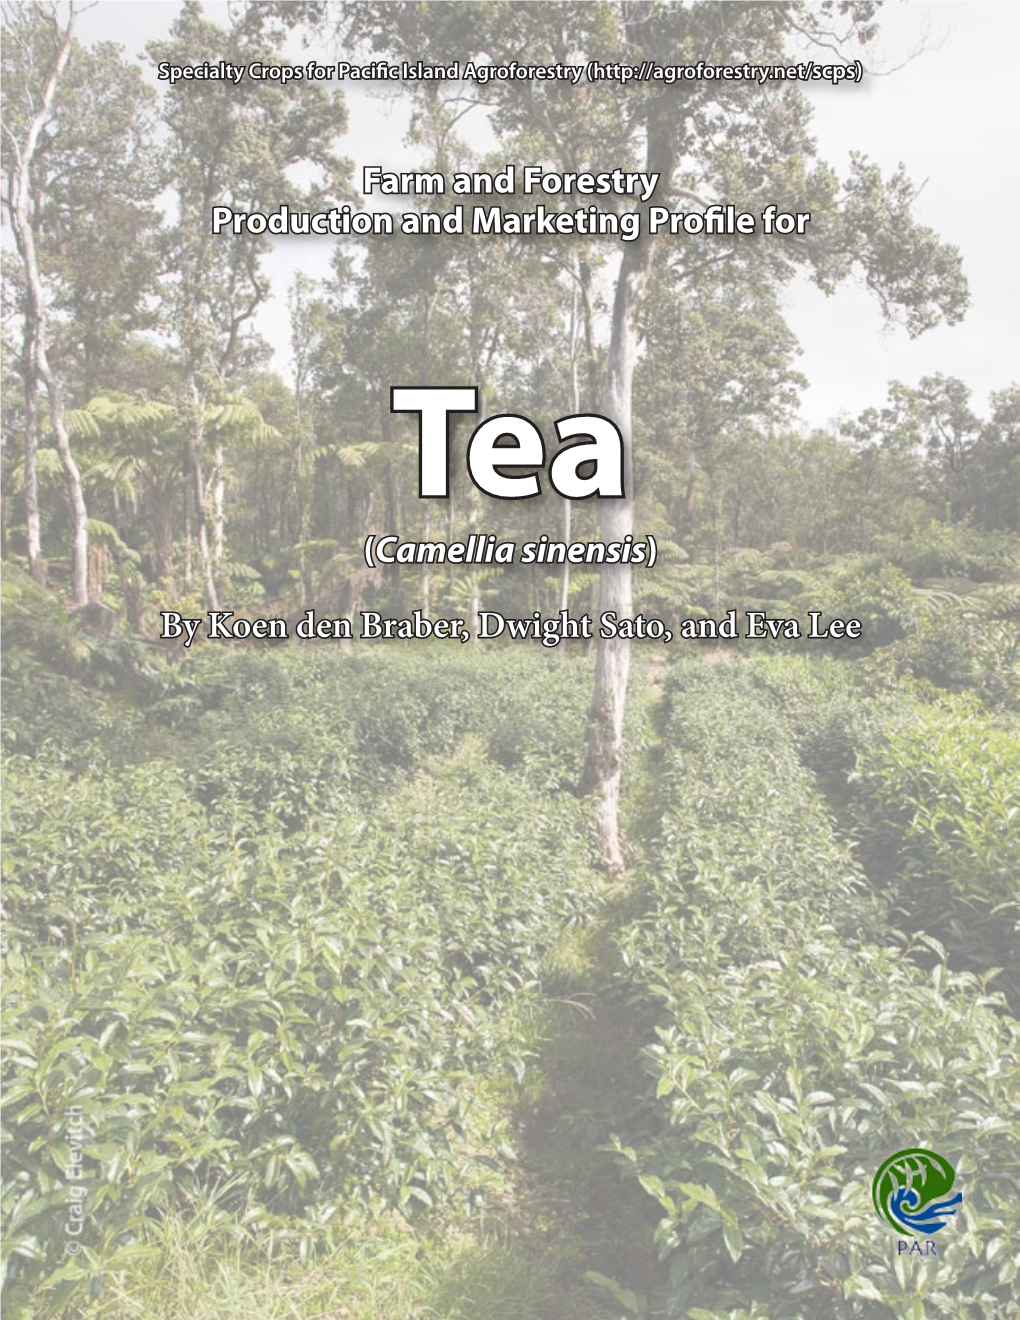 Farm and Forestry Production and Marketing Profile for Tea (Camellia Sinensis)